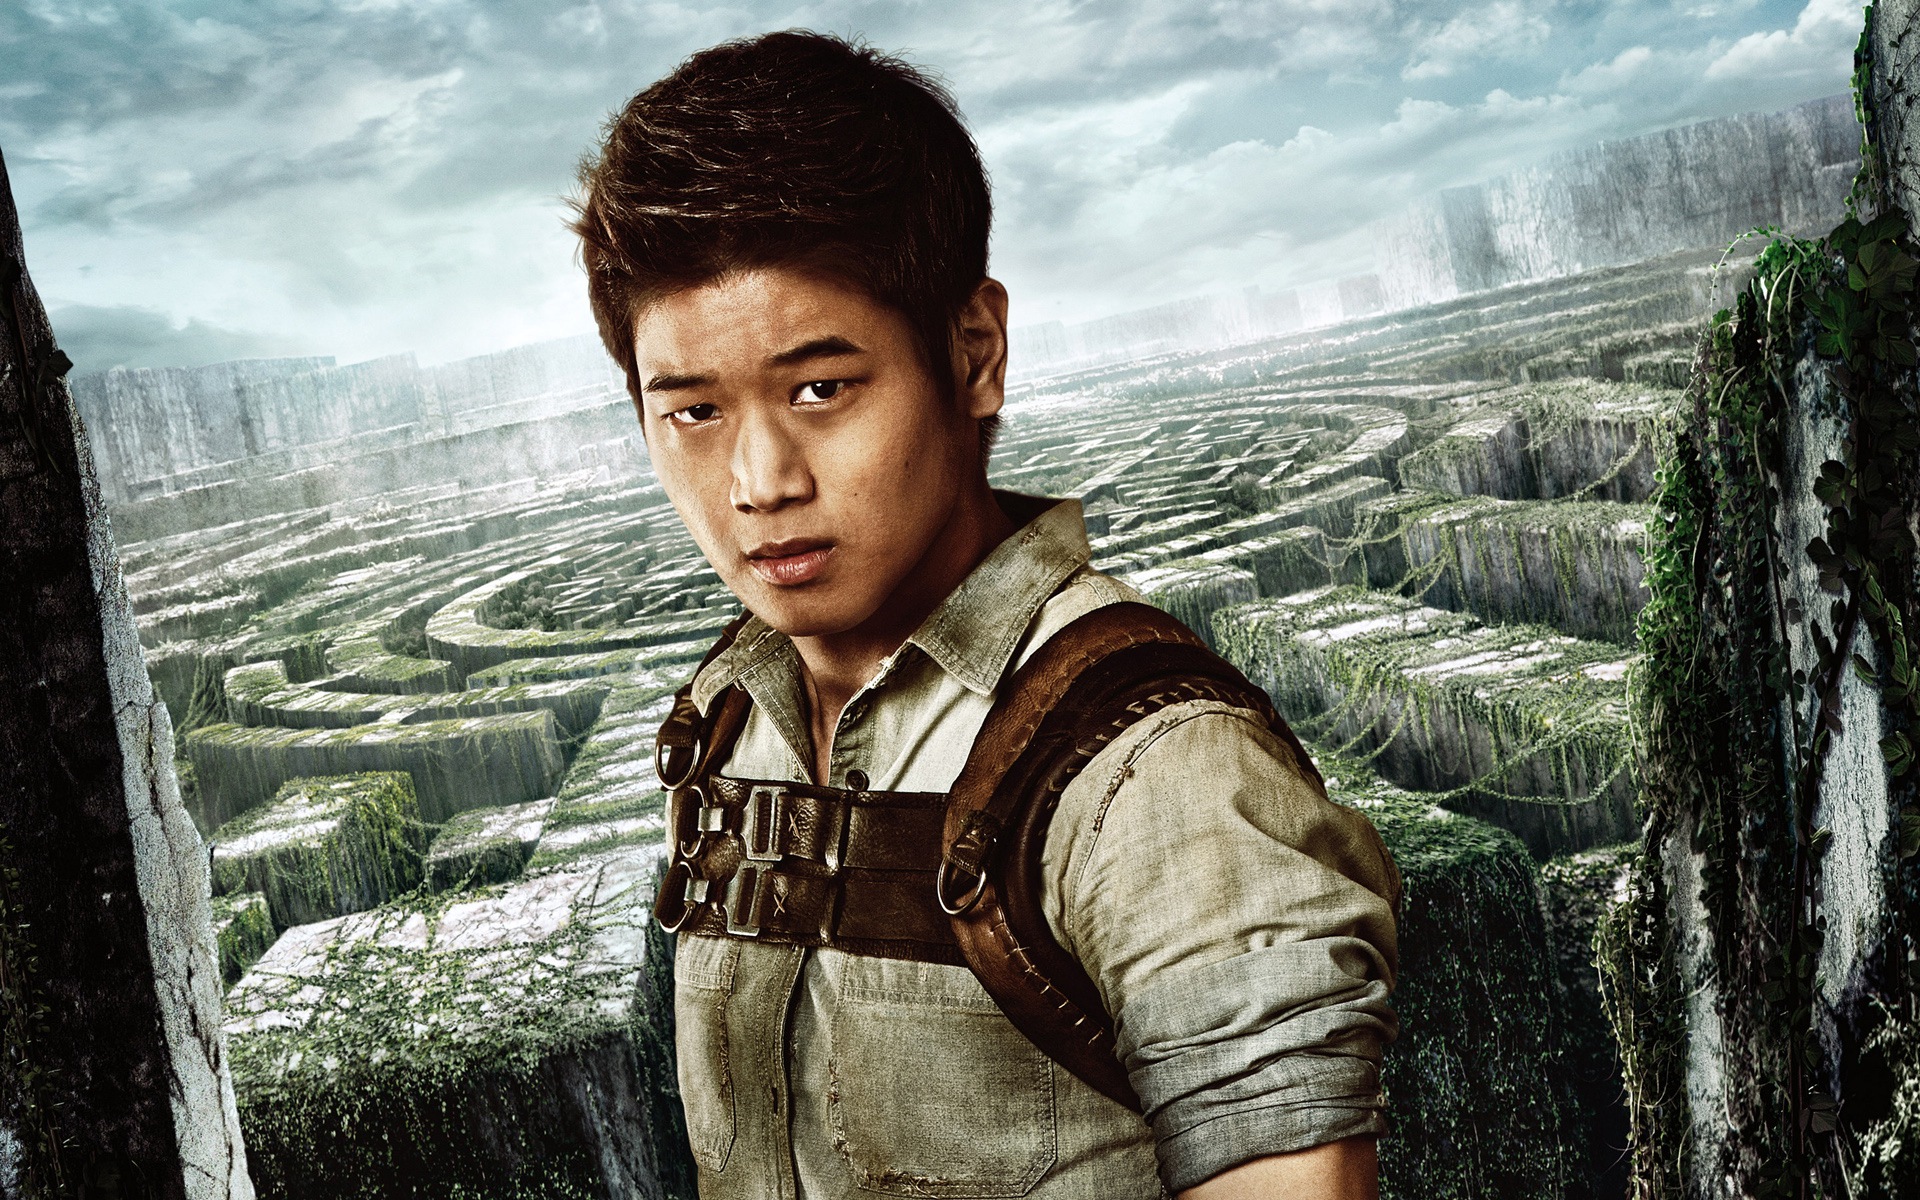 The Maze Runner HD movie wallpapers #10 - 1920x1200